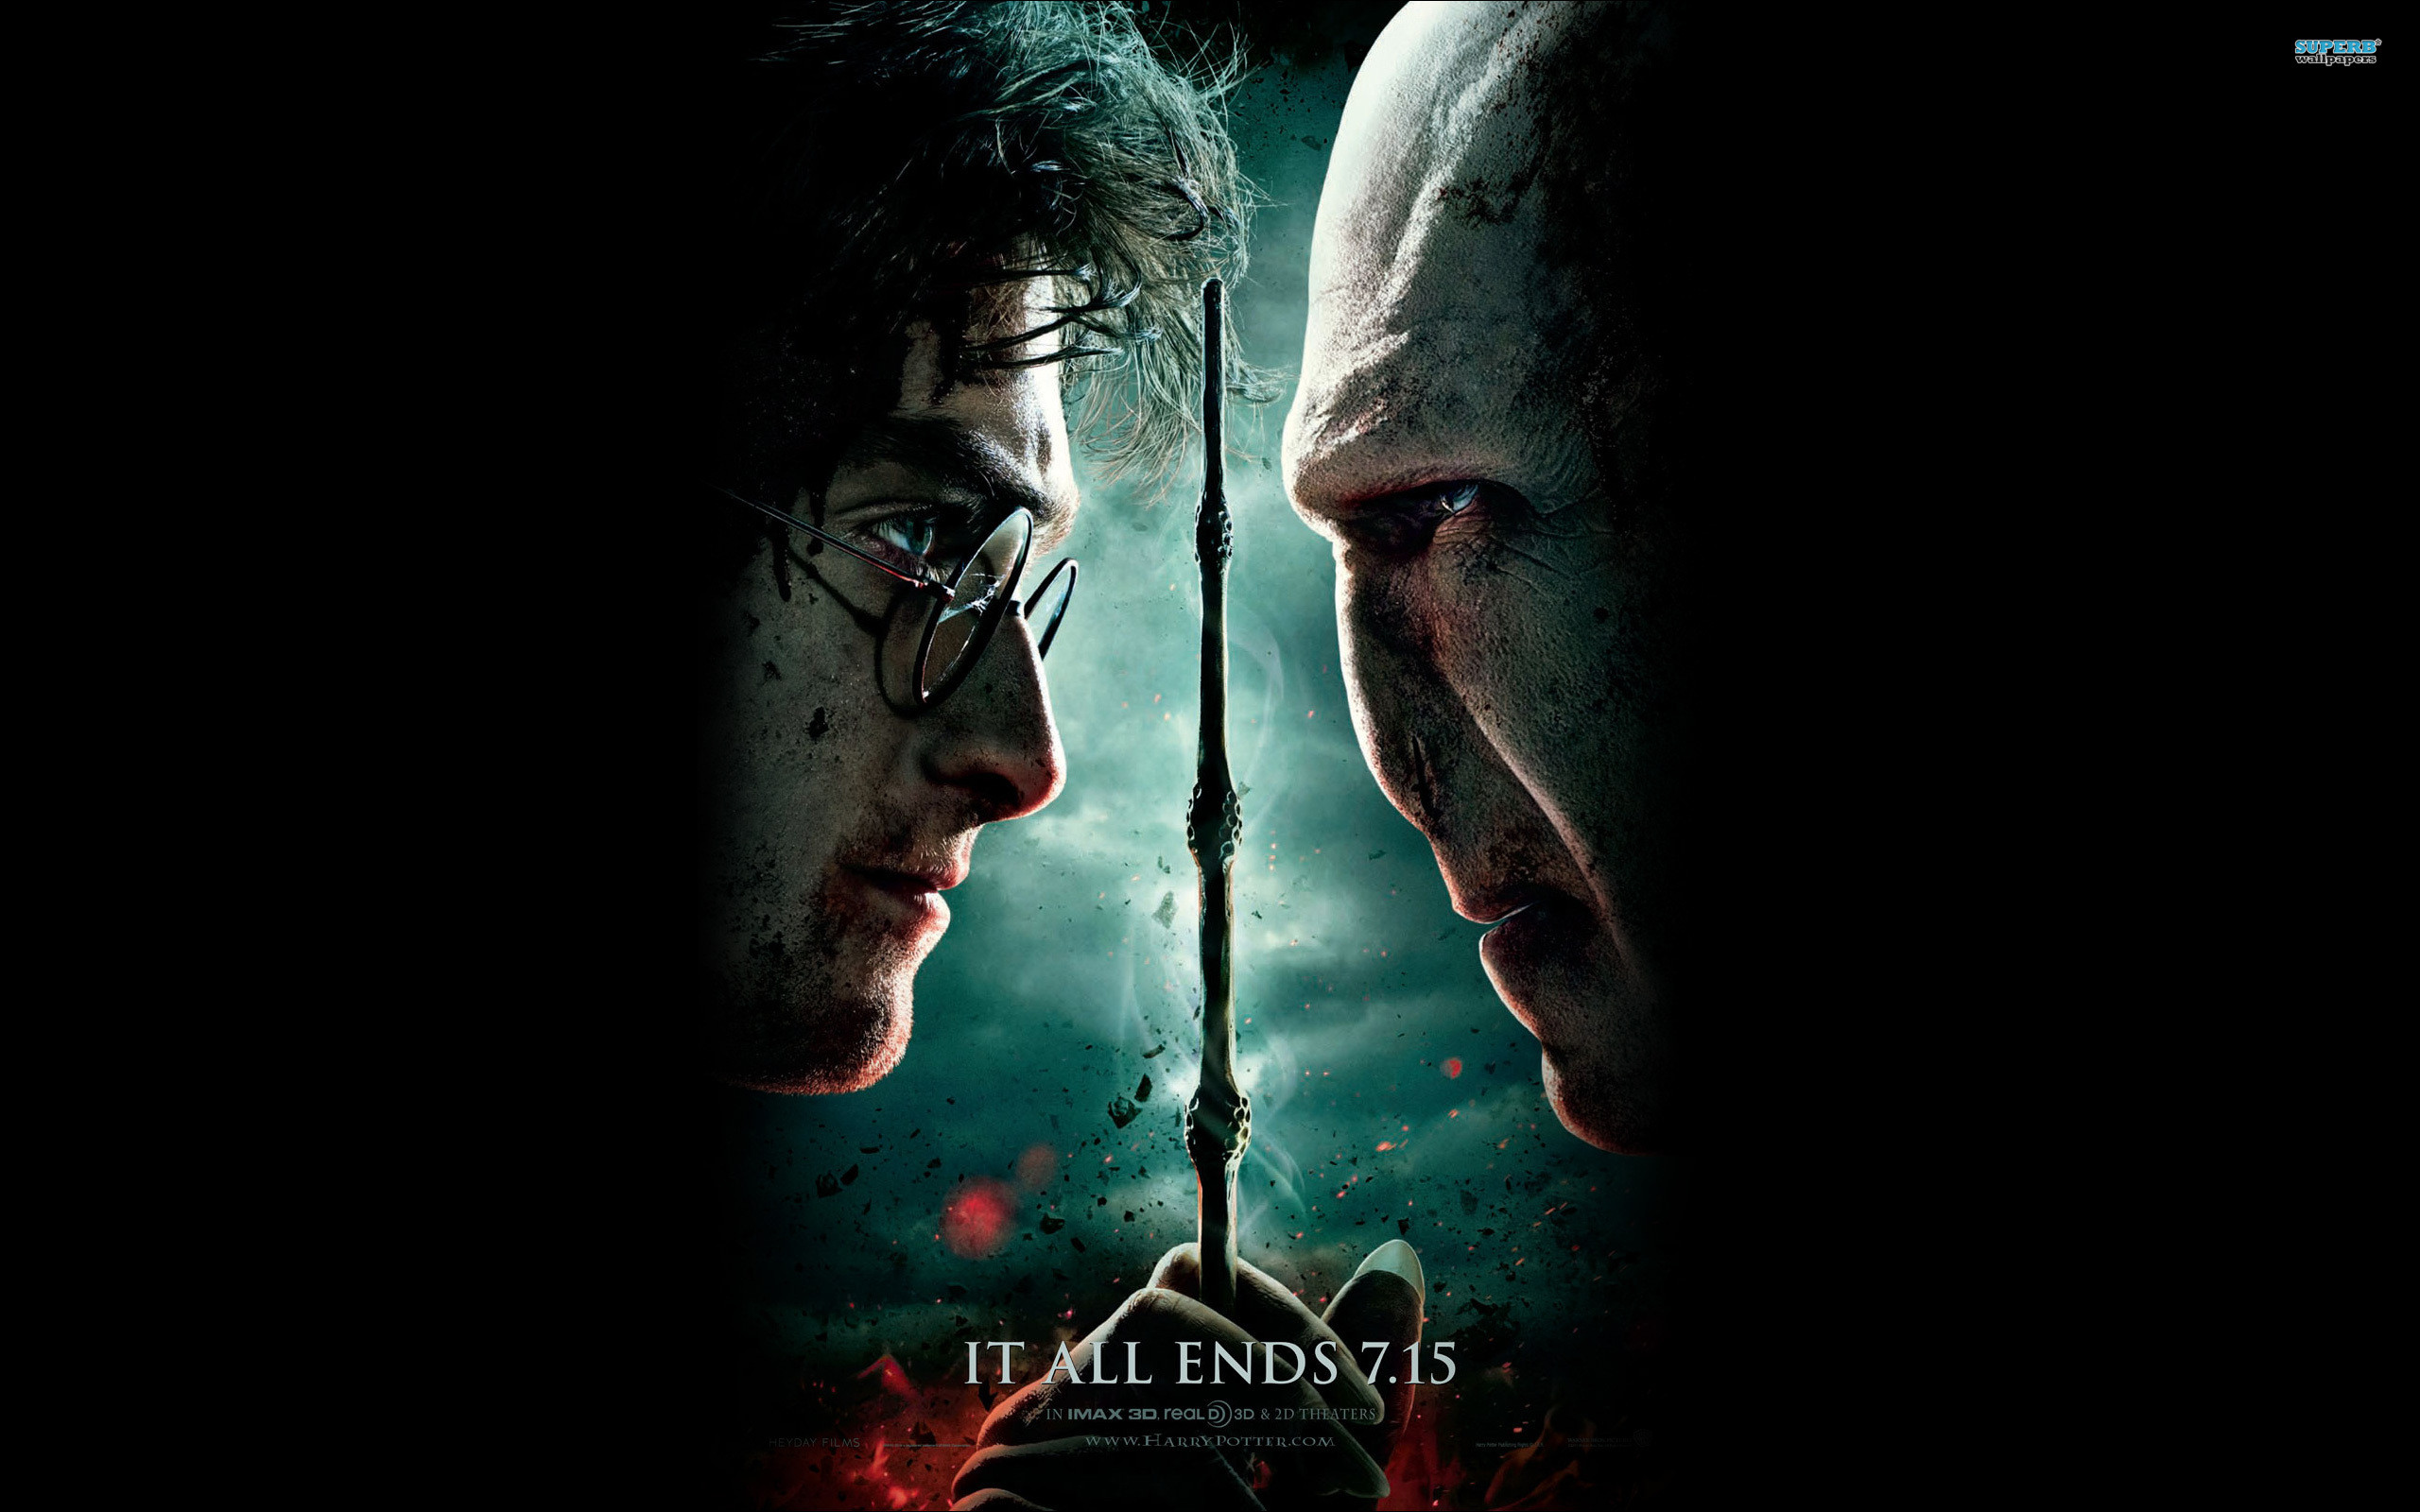 2560x1600 Harry Potter and the Deathly Hallows wallpaper - Movie wallpapers .